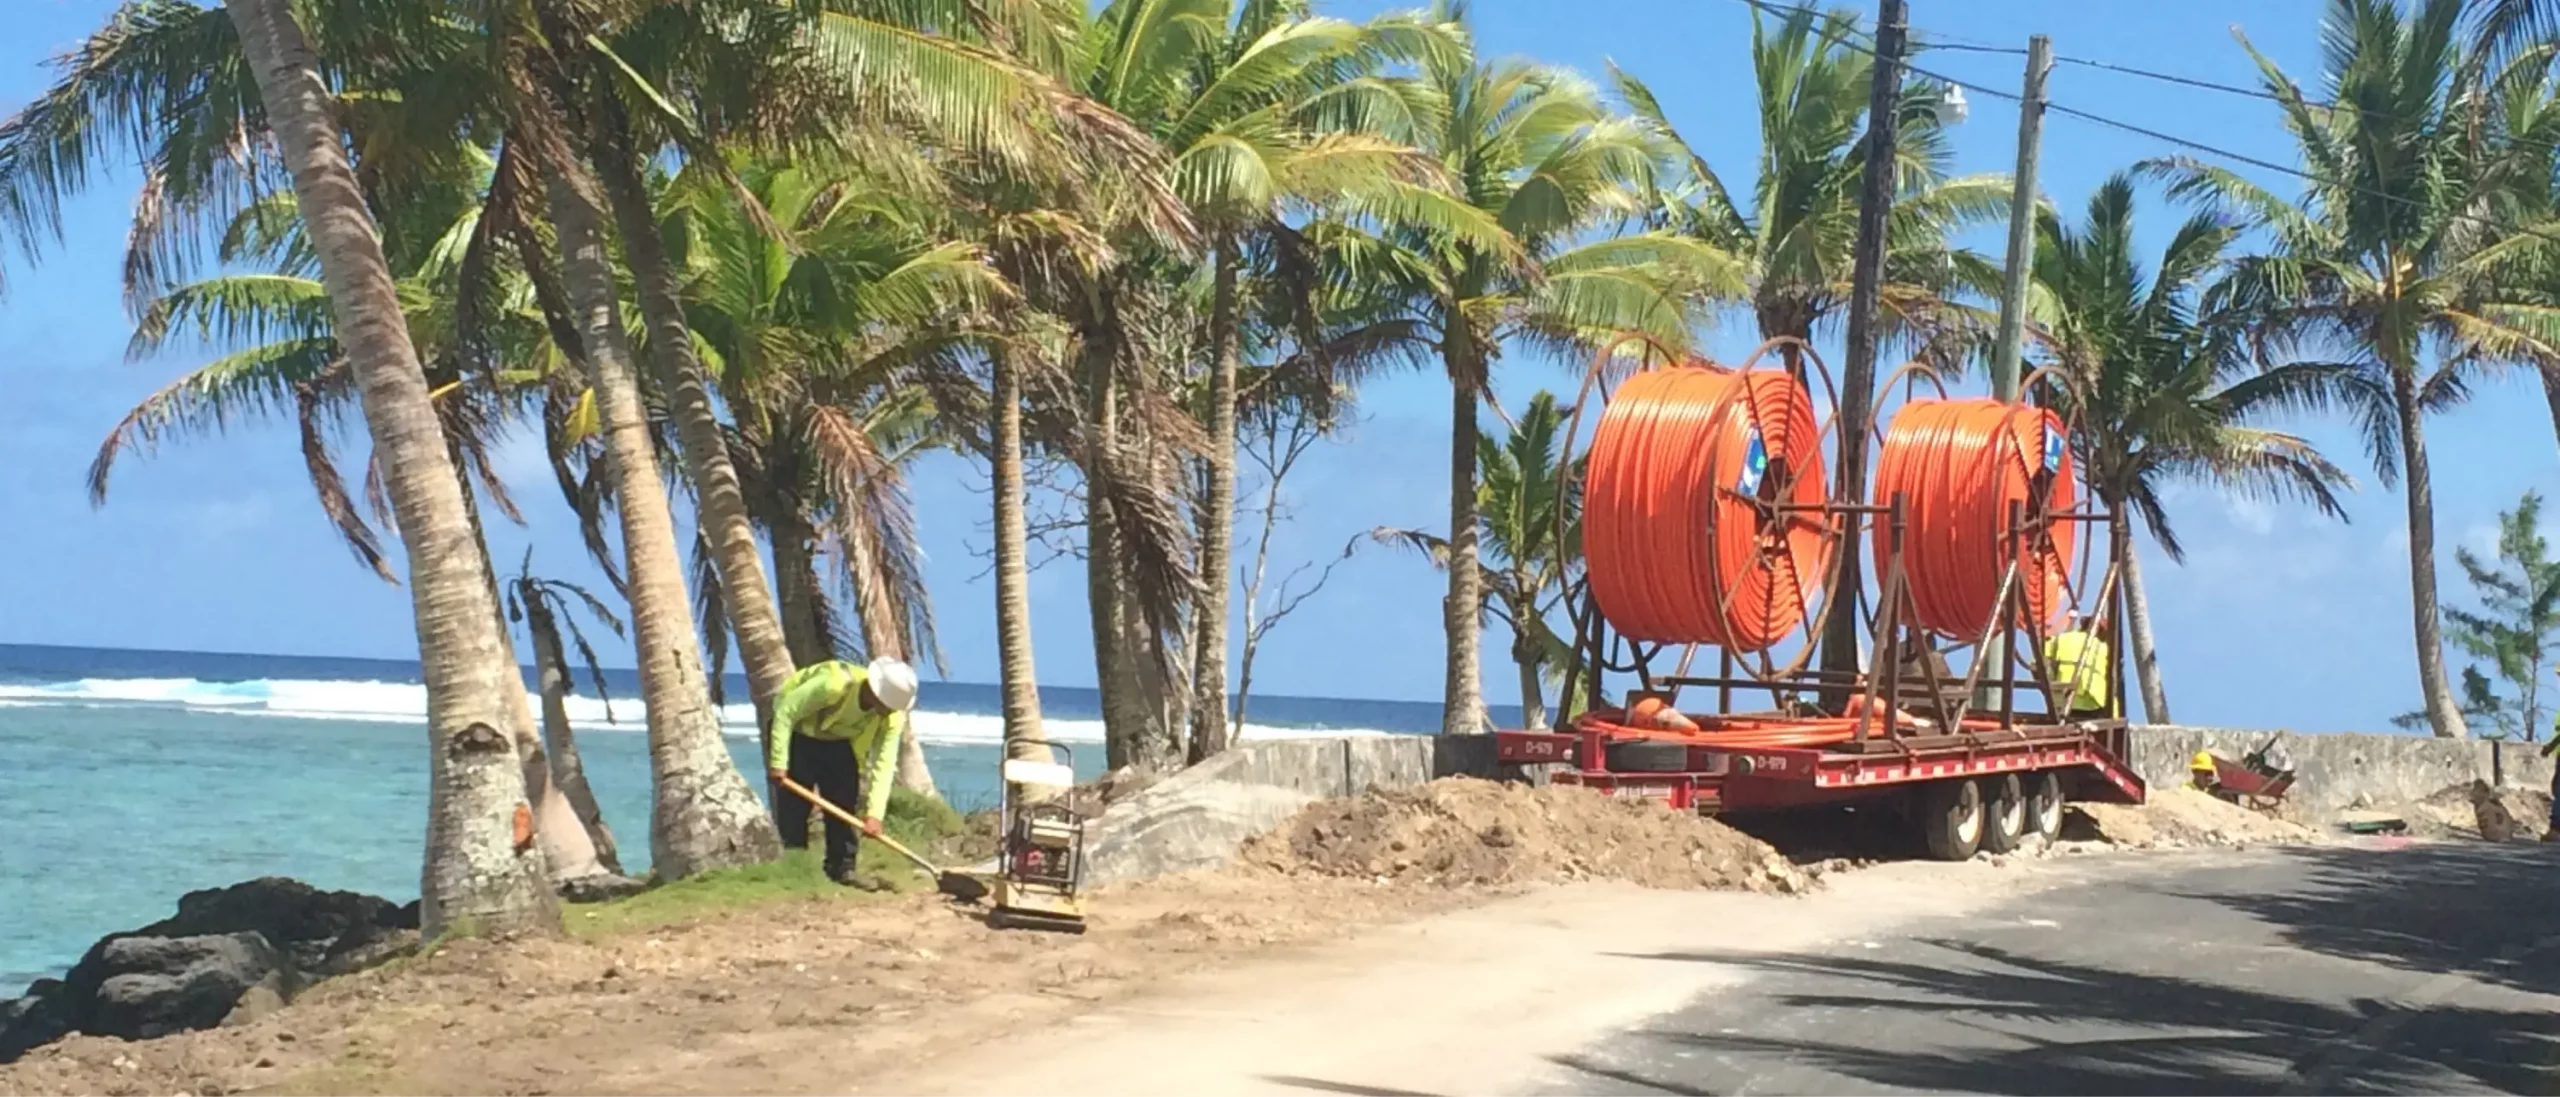 A Michels crew member working near the ocean and palm trees in Guam